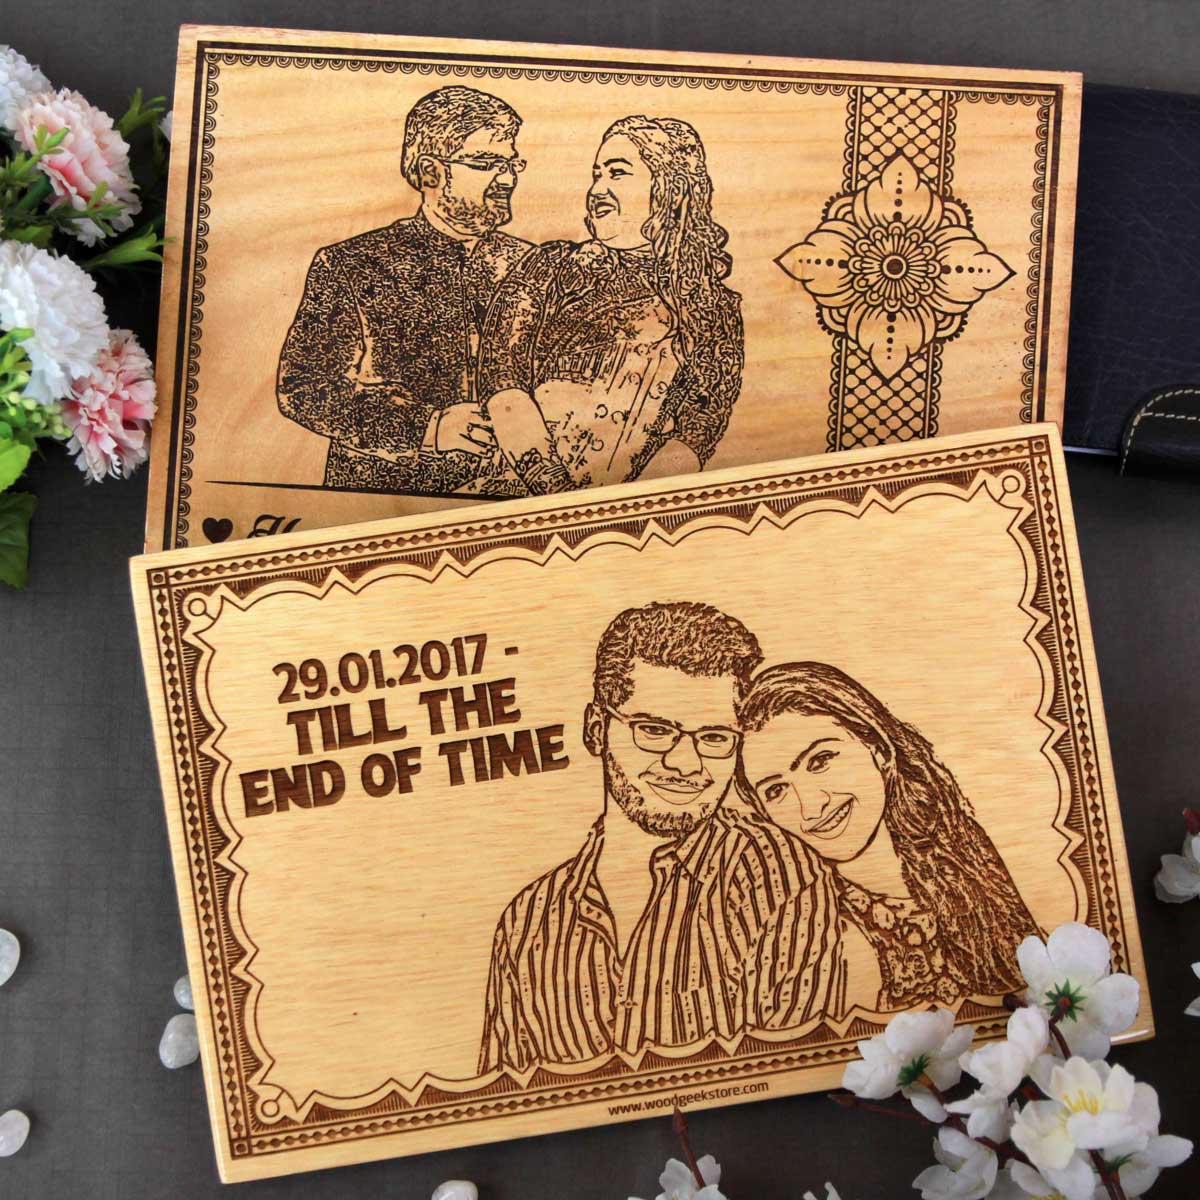 Buy Valentines Day Gift For Her, Him - Unique Gift for Valentine's Day,  Love Gift Anniversary Wedding Gift for Wife, Husband - Romantic Gift for  Boyfriend Girlfriend, Long Distance Relationship Gift Ideas